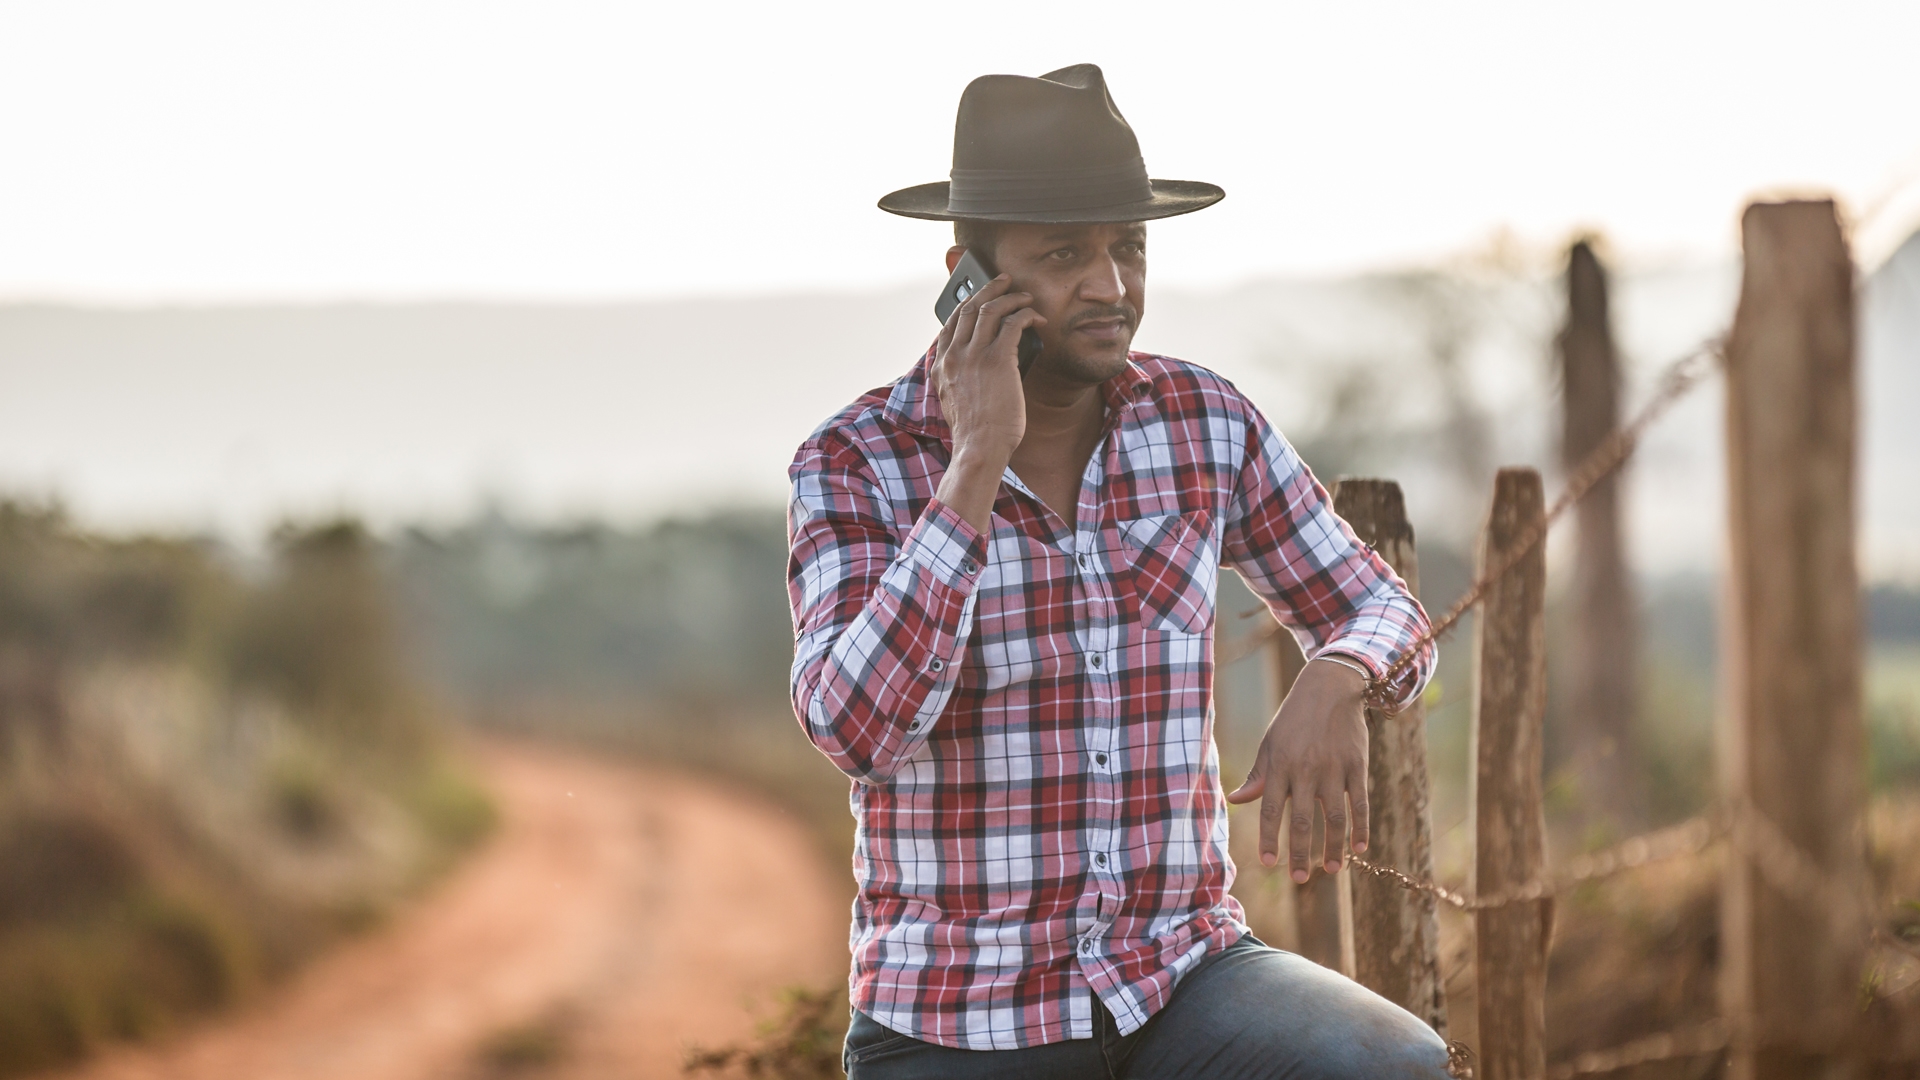 Farmer on a phone leaning against a wire fence